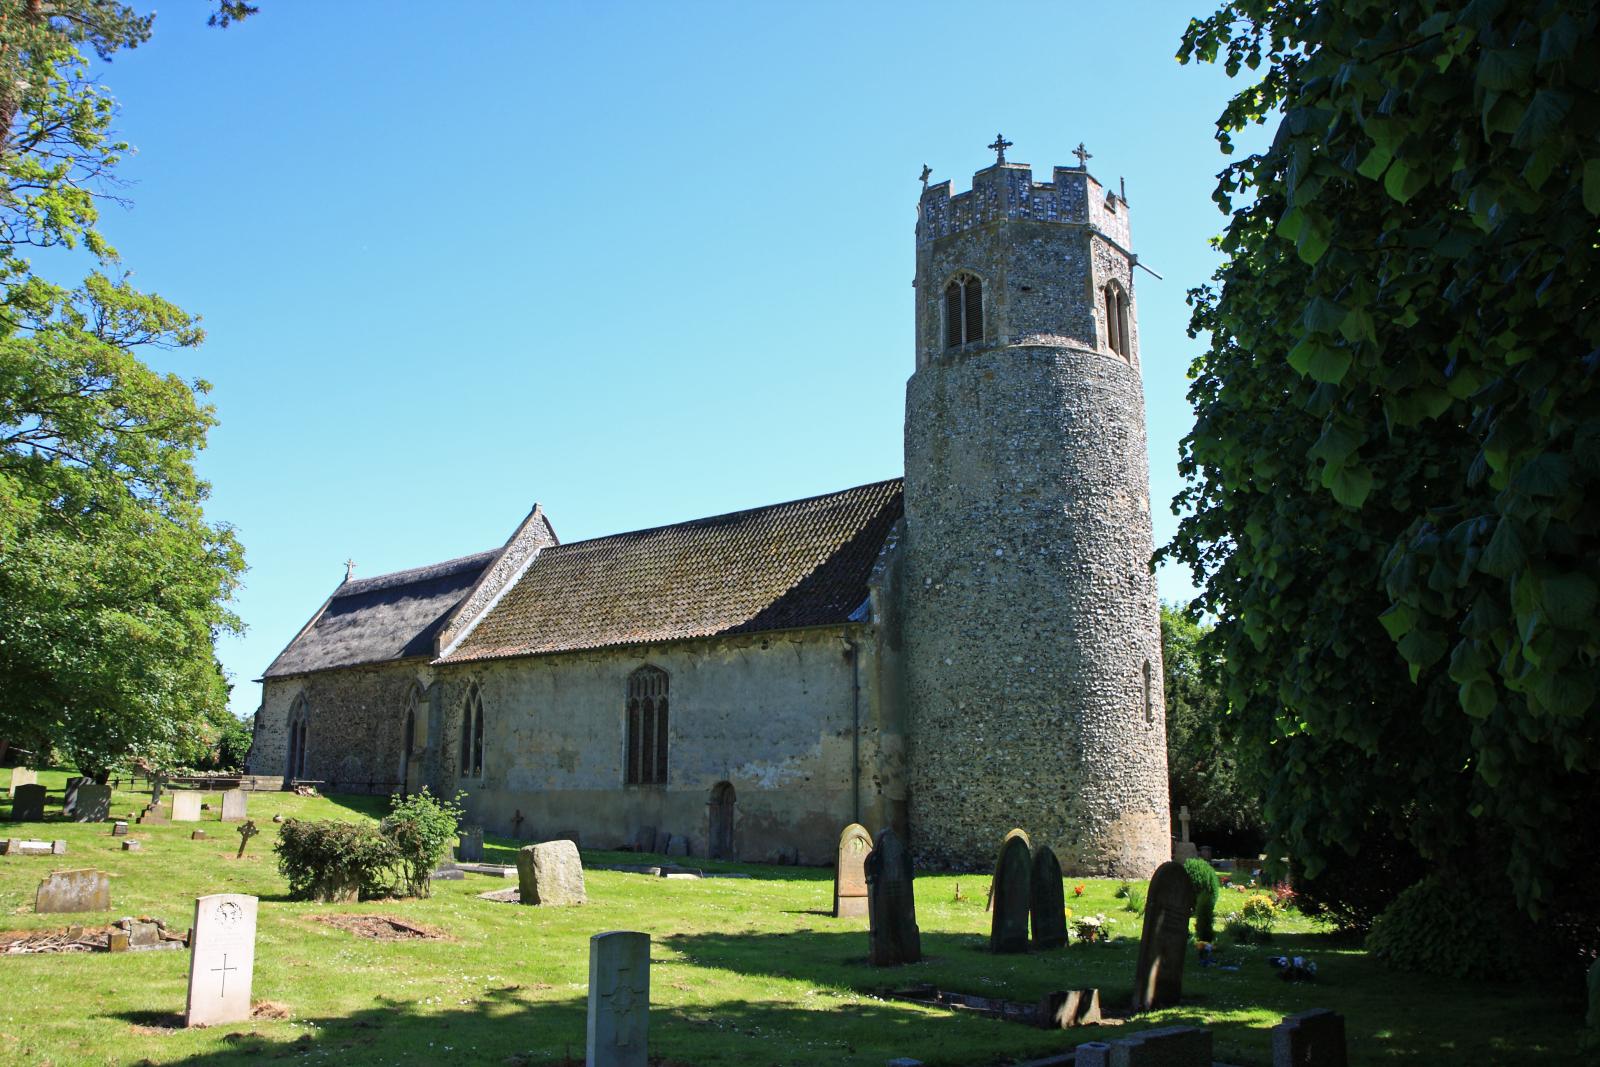 the old church has a large tower and a small steeple